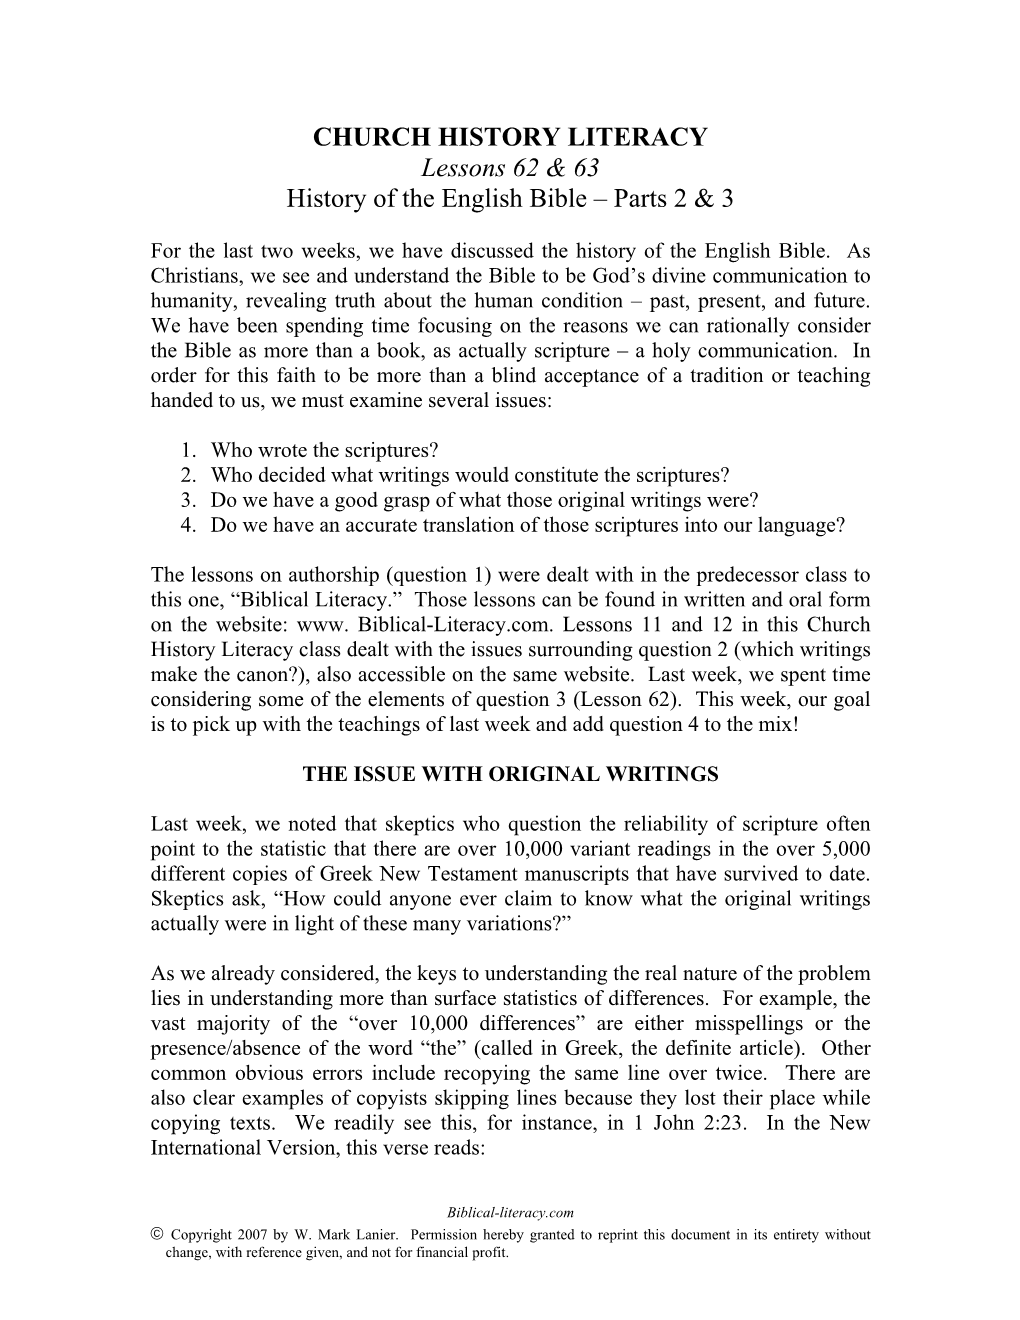 History of the English Bible – Parts 2 & 3